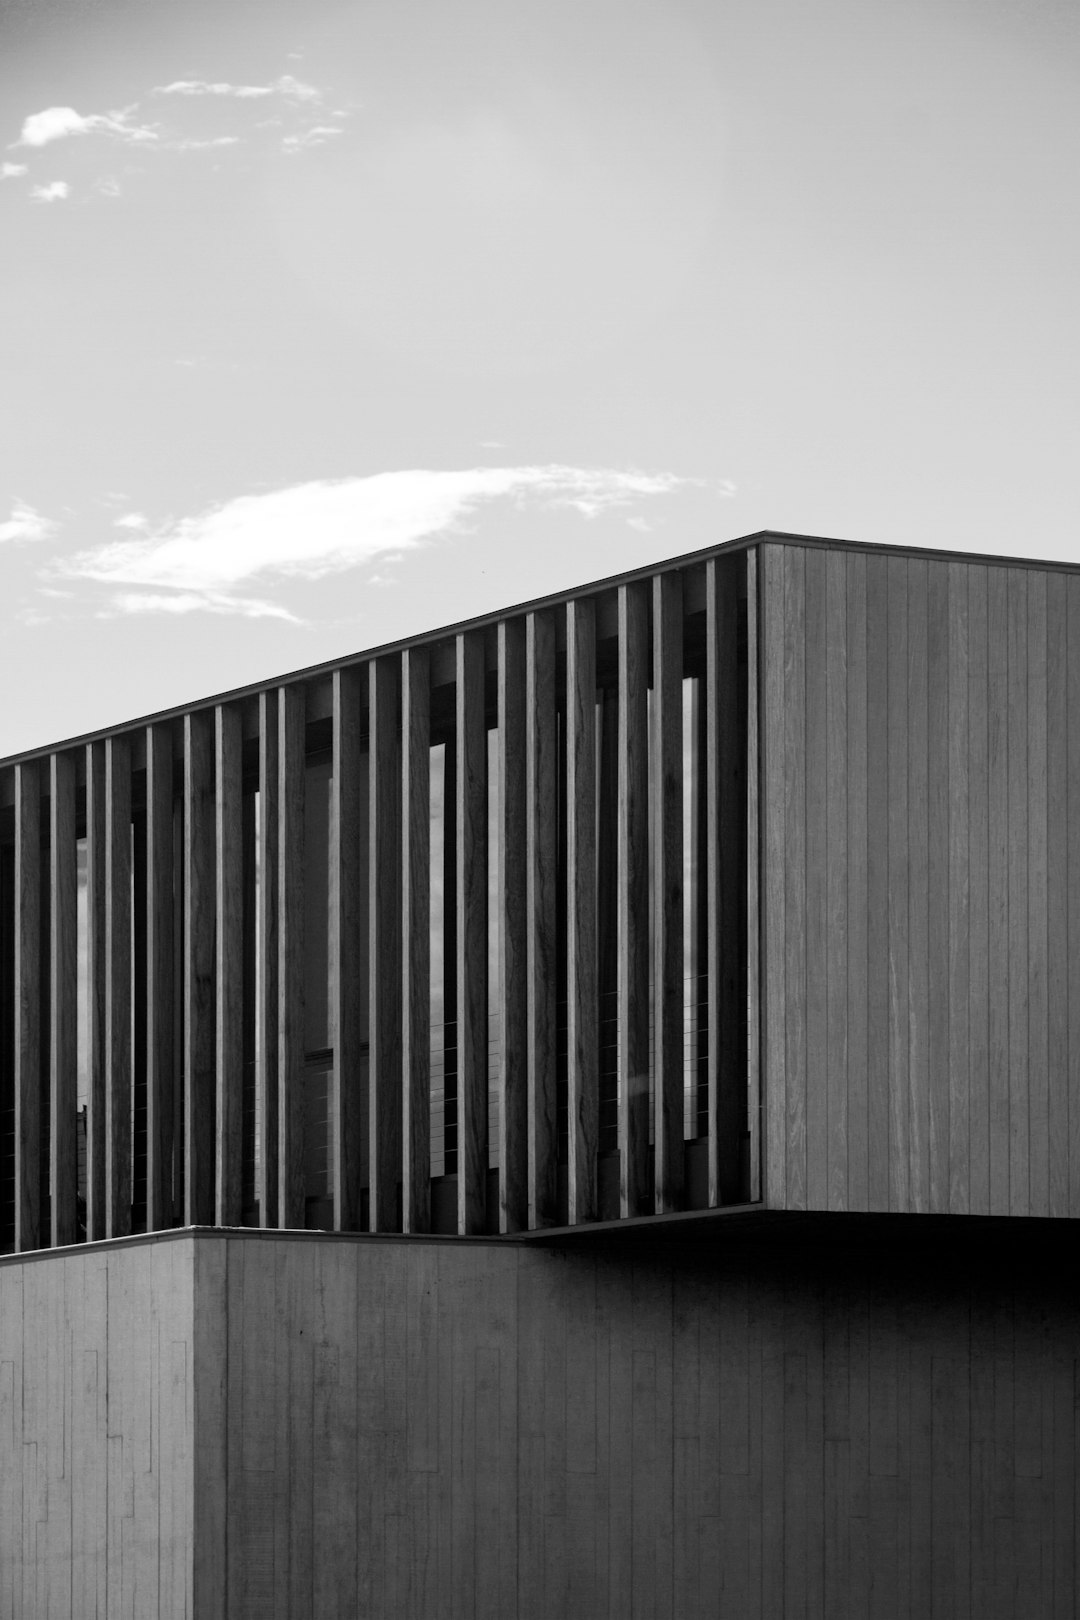 A black and white photo of the facade of an art museum, with concrete panels and vertical wooden slats, in the style of minimalism and modernist architecture. An architectural photography of the building under an overcast sky.